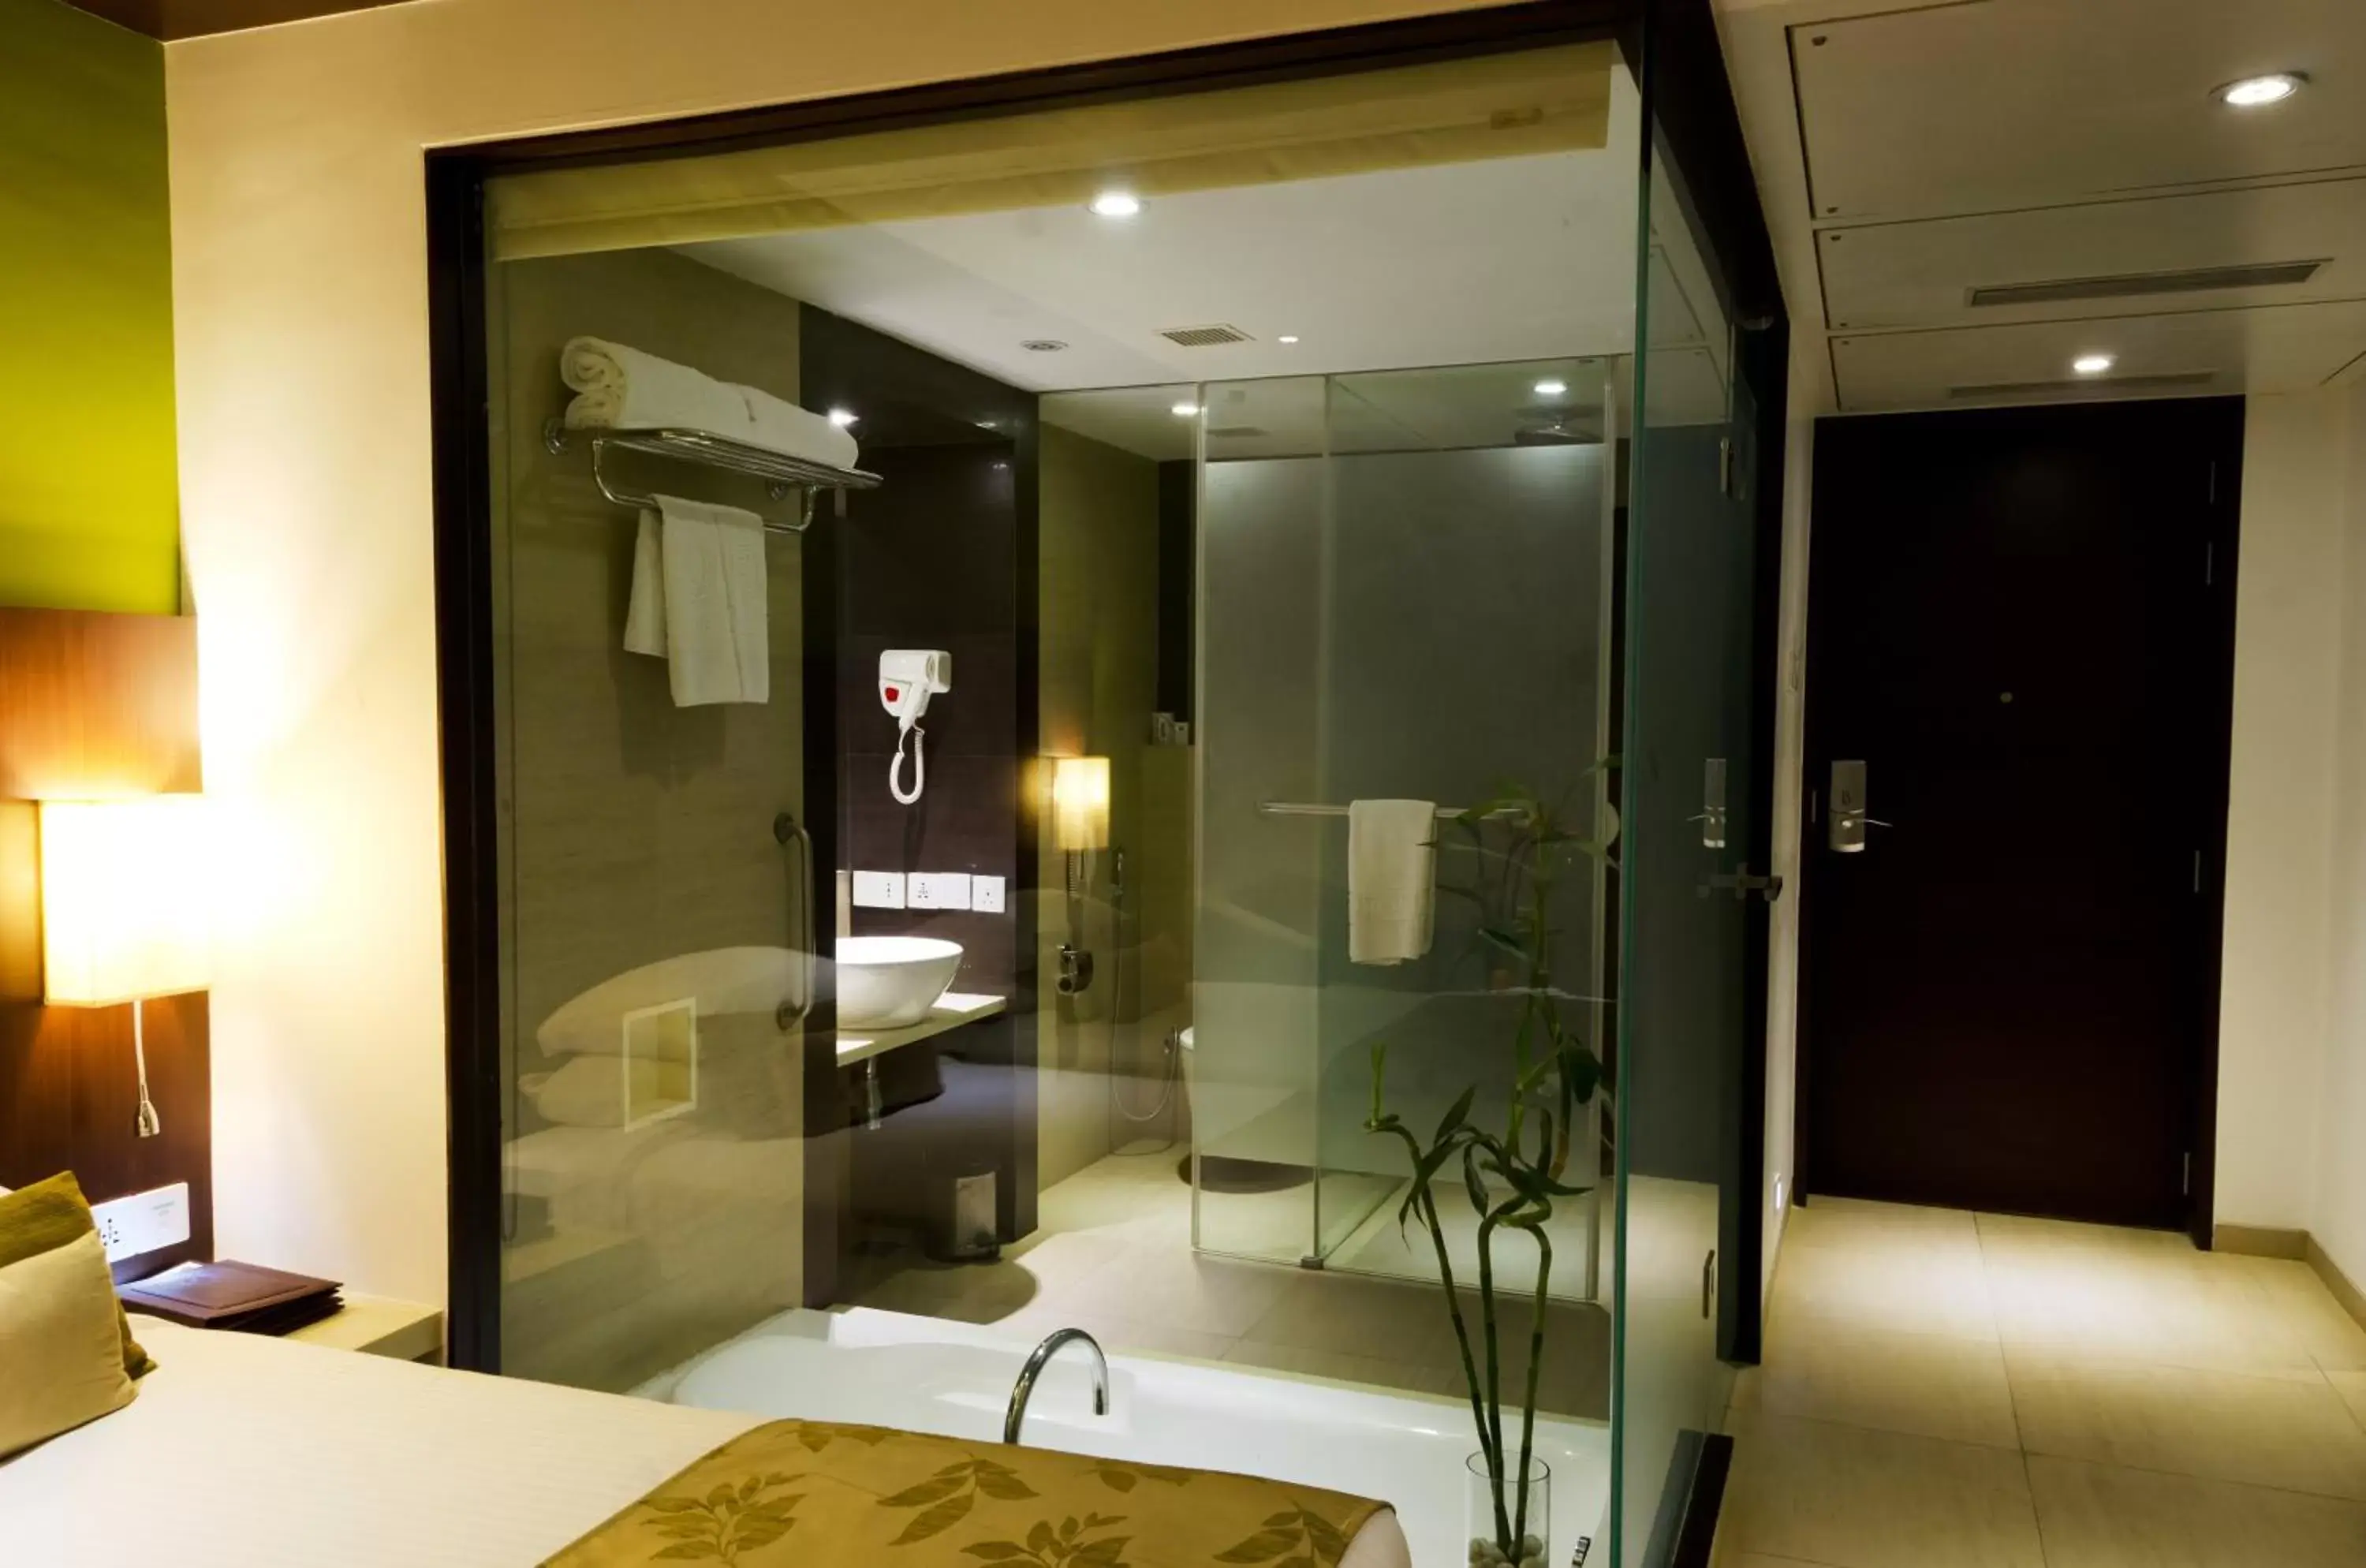 Bathroom in Ramee Grand Hotel and Spa, Pune